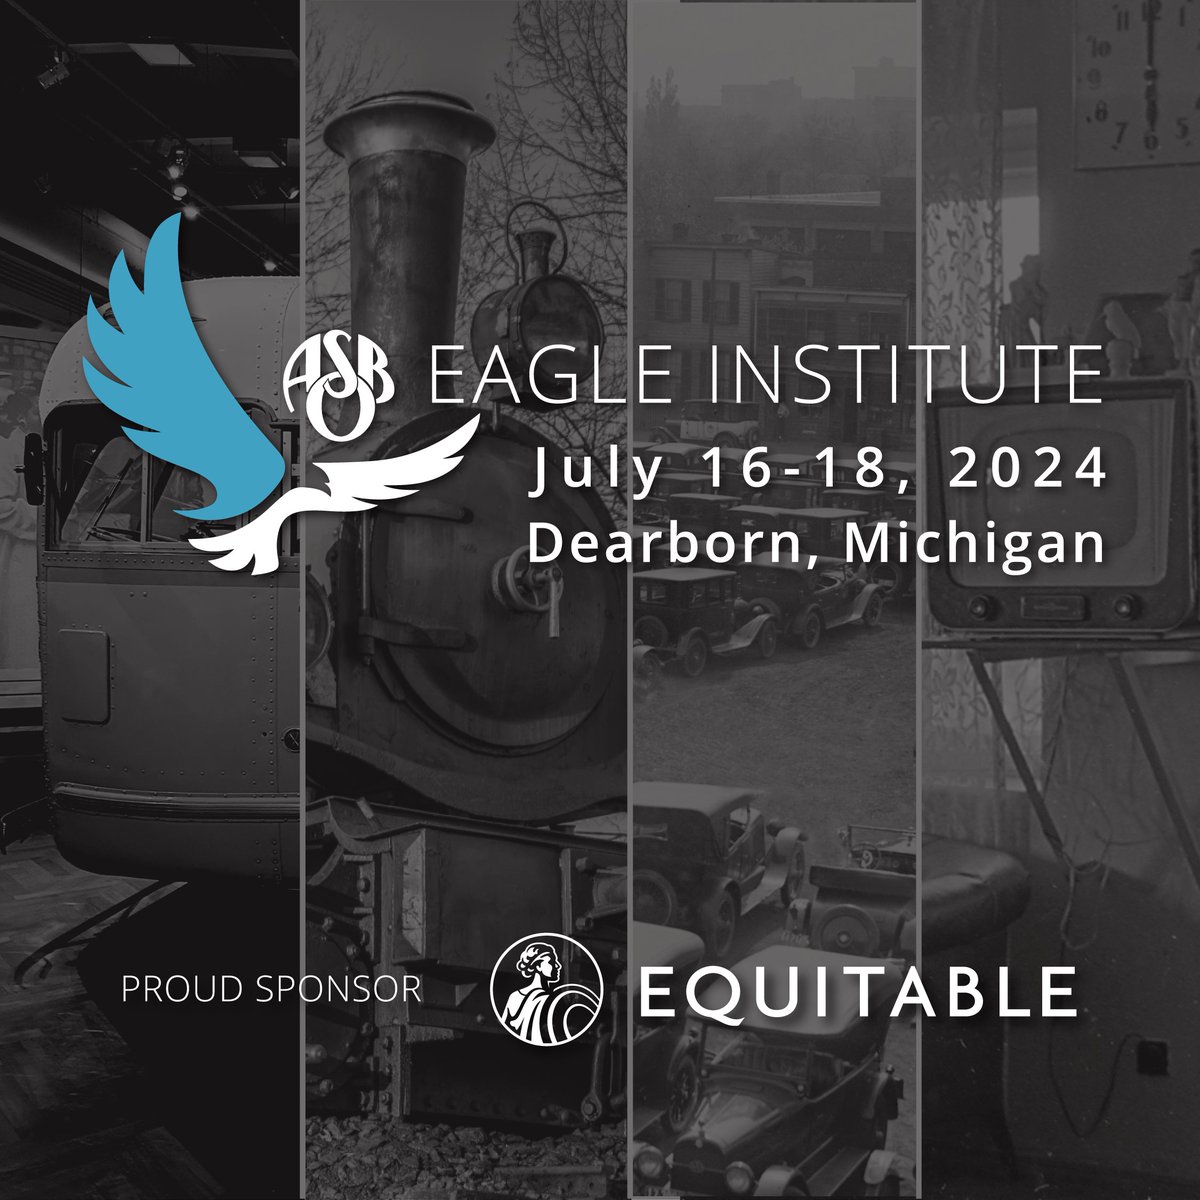 Embark on a transformative journey at the 2024 Eagle Institute in Dearborn, MI, Jul 16-18, where leadership ignites, connections flourish, and visions take flight. Redefine leadership & shape the future of education! Register: asbointl.org/EagleInstitute Proud sponsor: @equitablefin